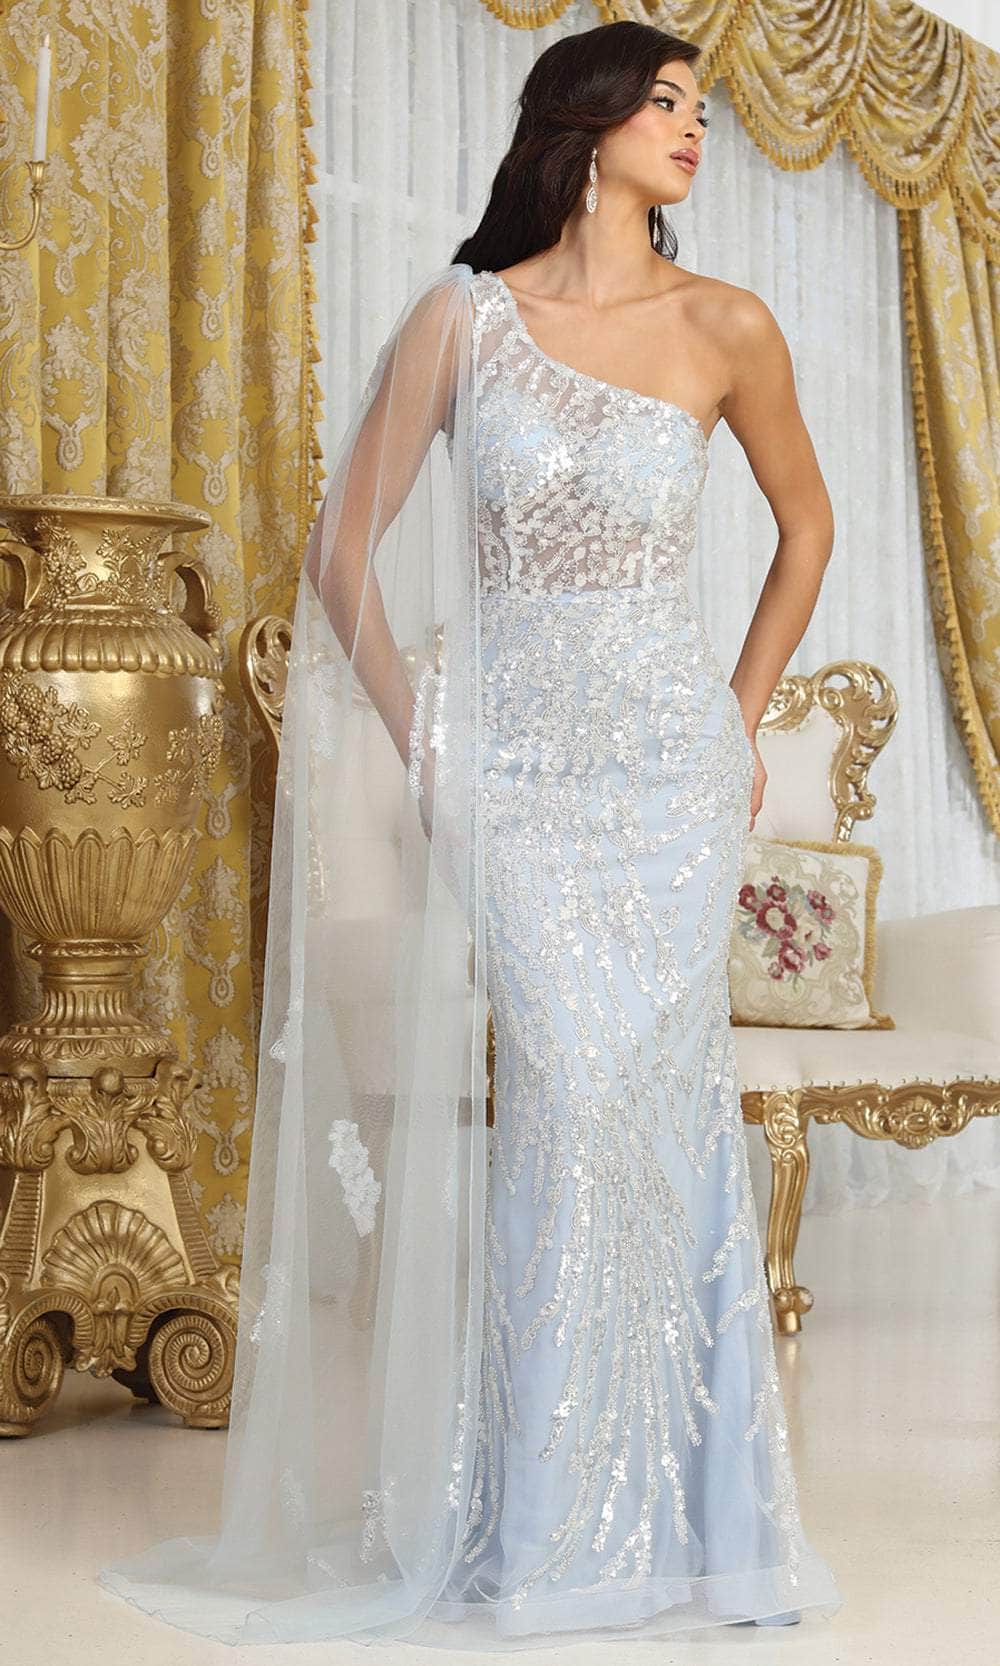 May Queen RQ8075 - Asymmetric Beaded Prom Gown with Cape
